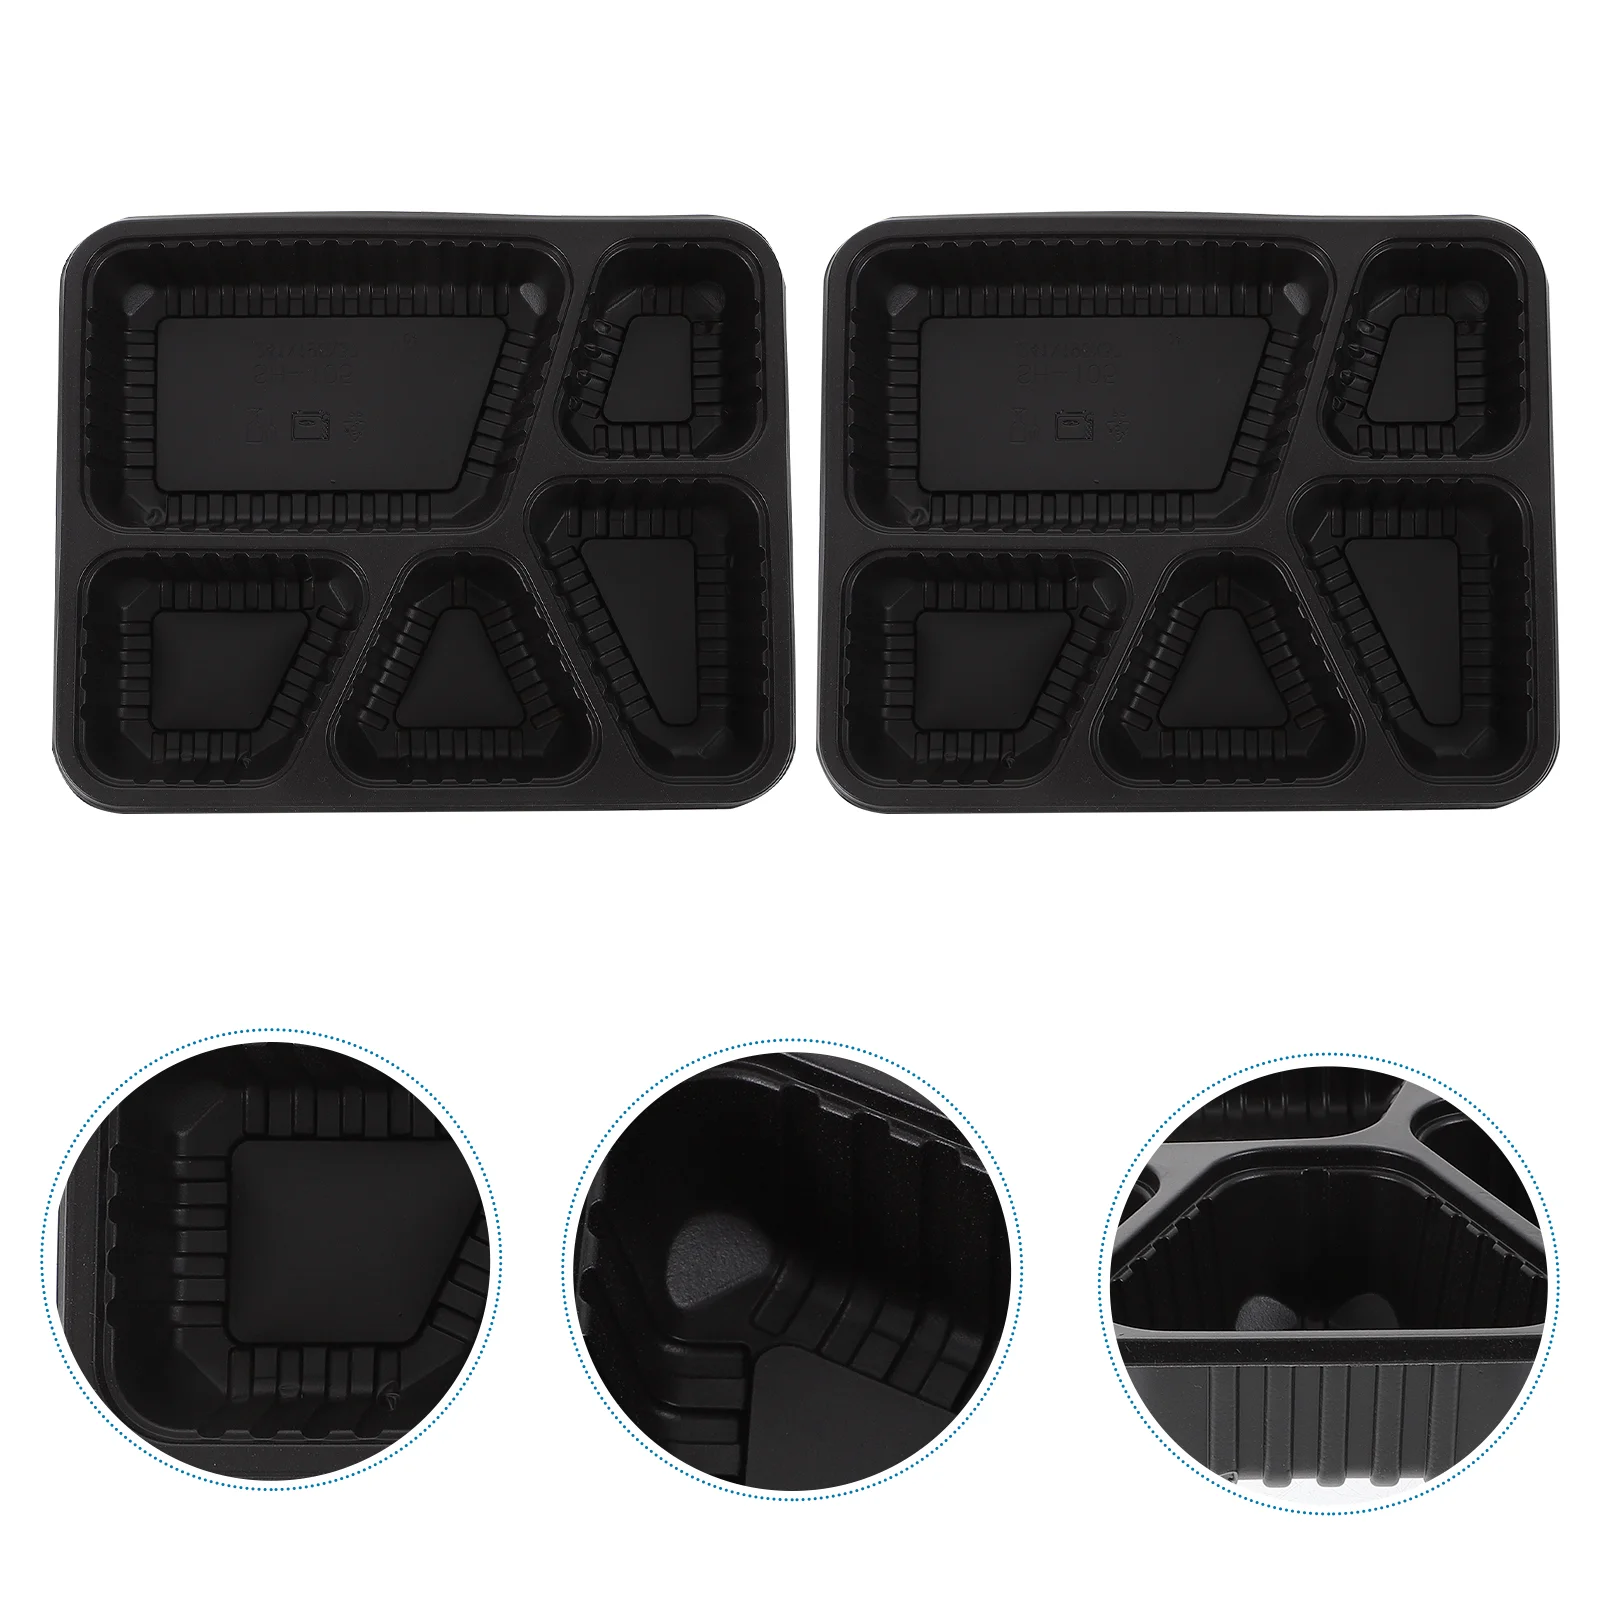 

30pcs Meal Prep Containers with Lids 5 Compartment Storage Bento Boxs Microwave Safe ( Black )